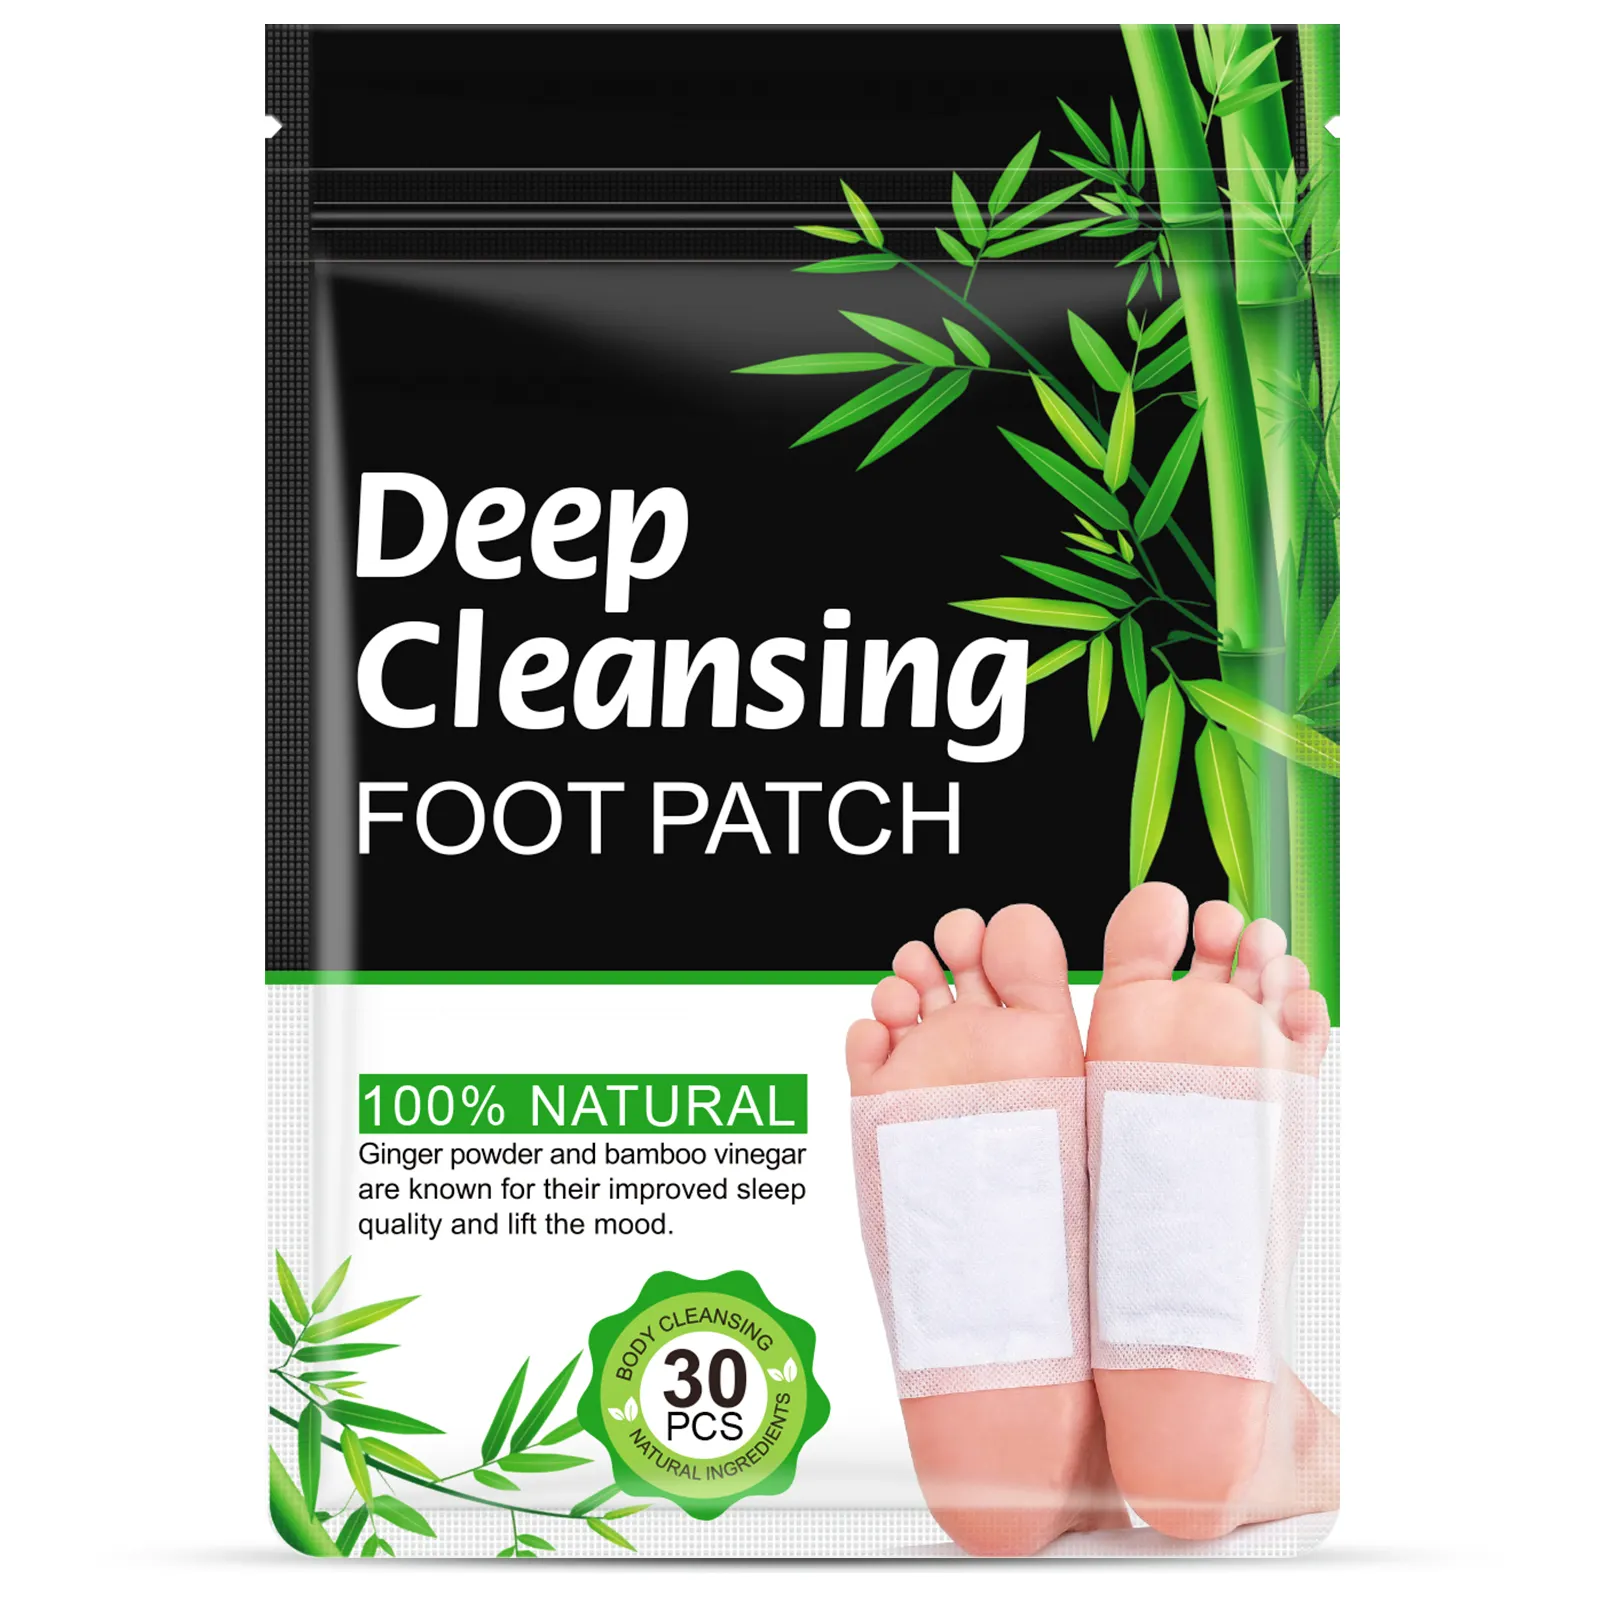 ALIVER OEM customization relax body deep sleep natural herbal foot warmer patch,deep cleansing detoxify foot patch detox